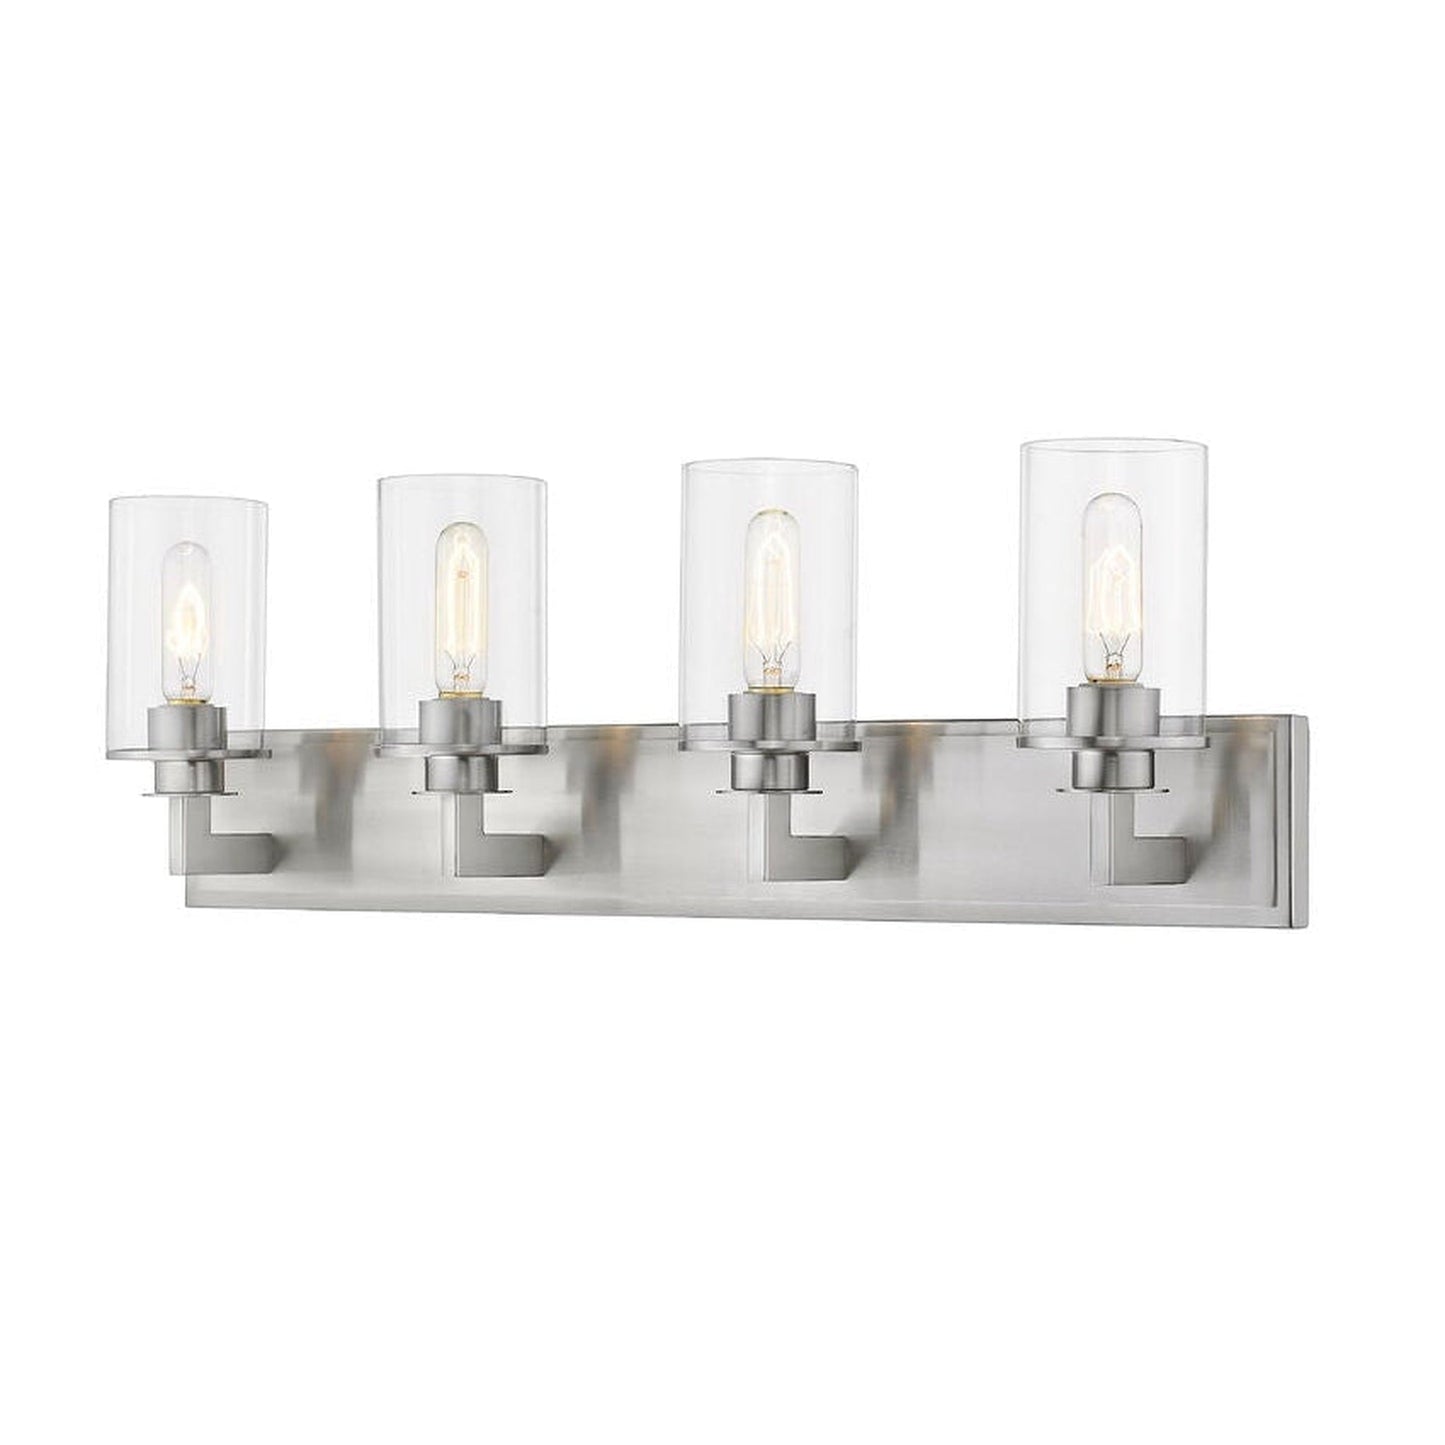 Z-Lite Savannah 32" 4-Light Brushed Nickel Vanity Light With Clear Glass Shade